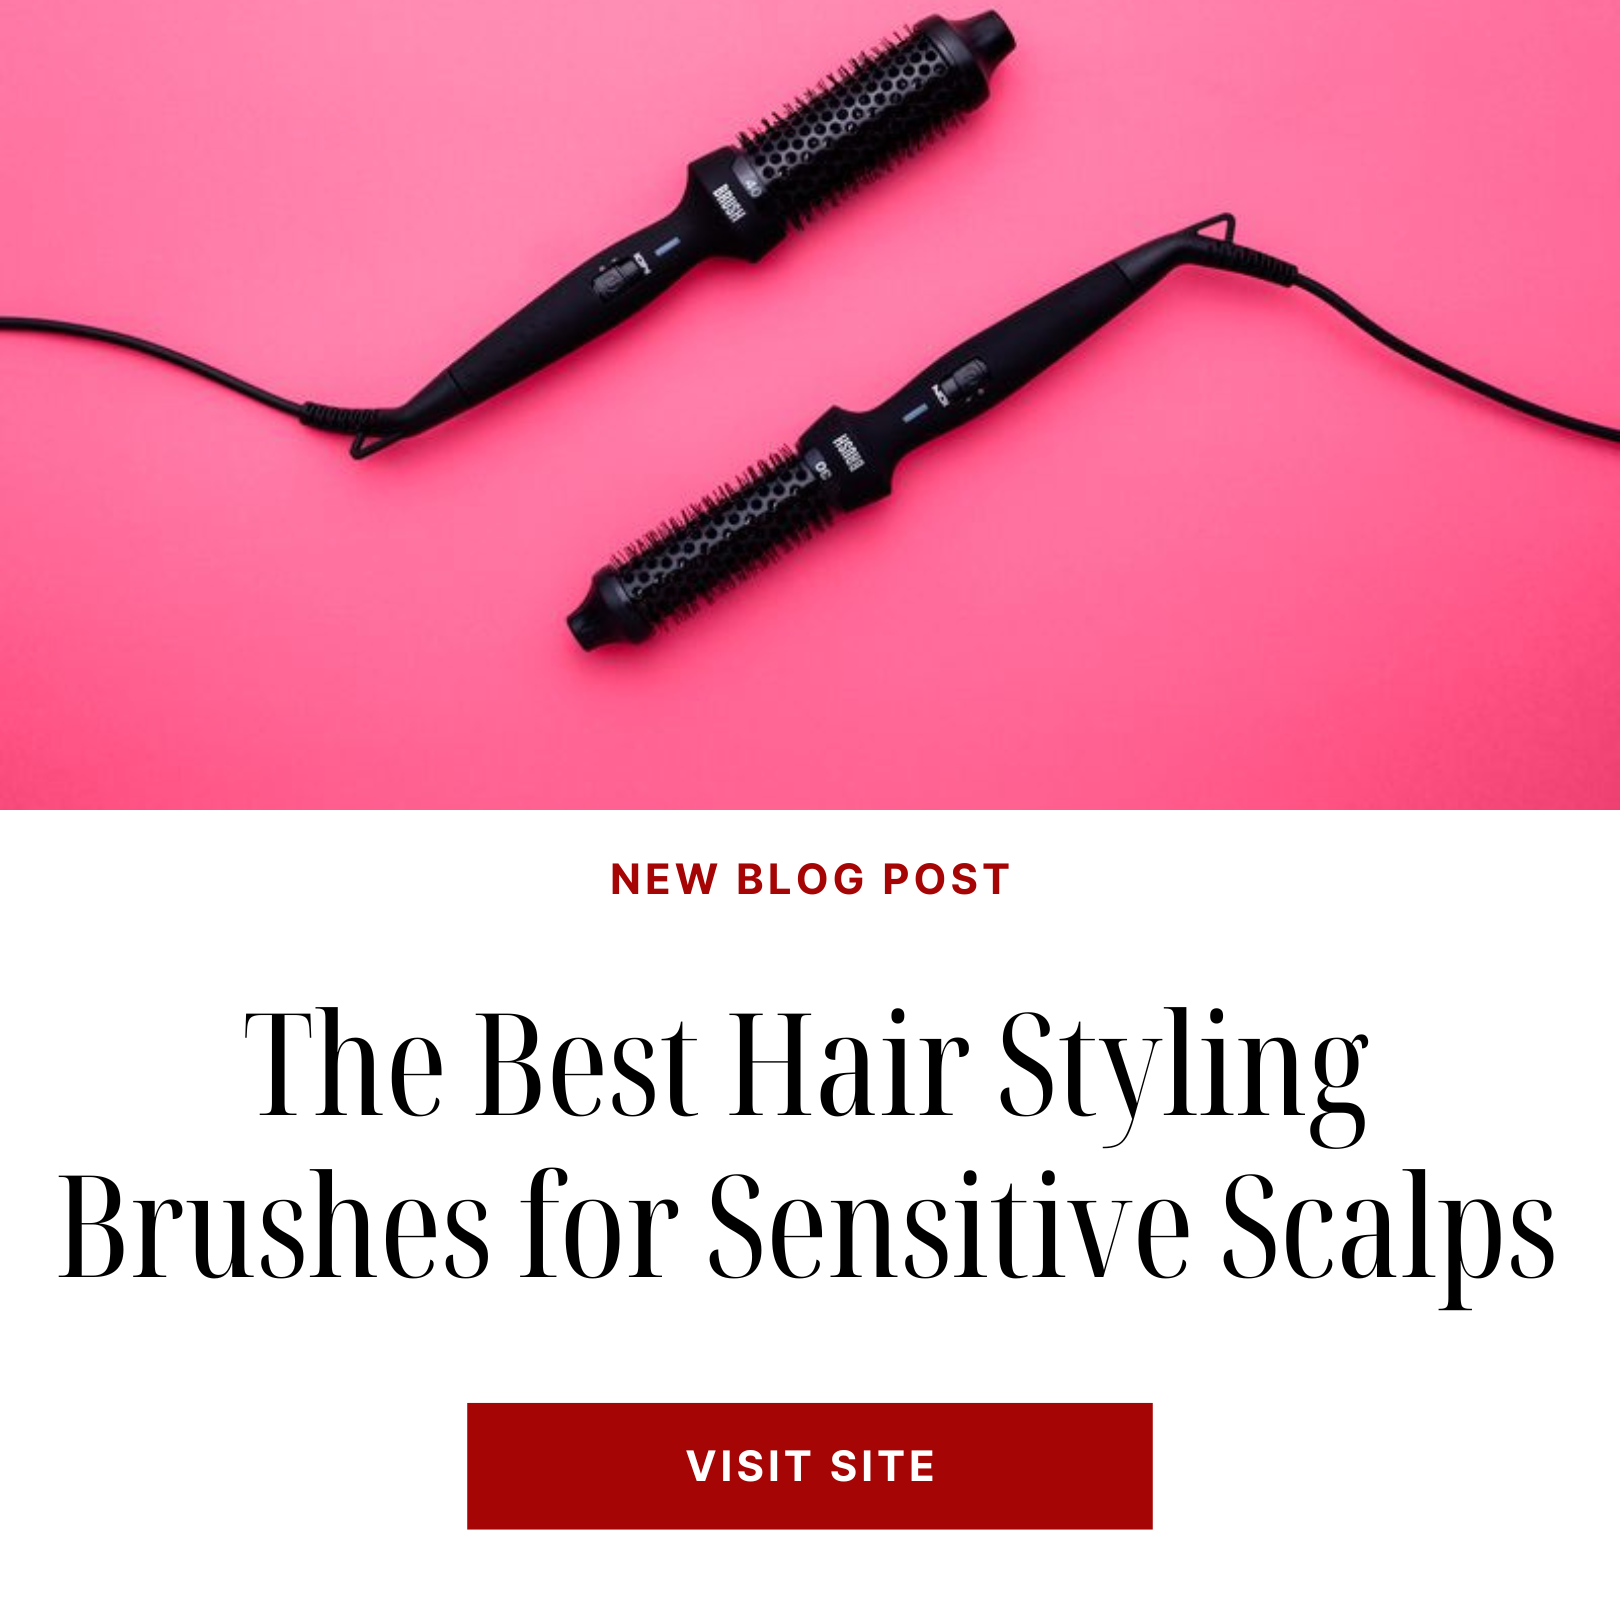 The Best Hair Styling Brushes for Sensitive Scalps